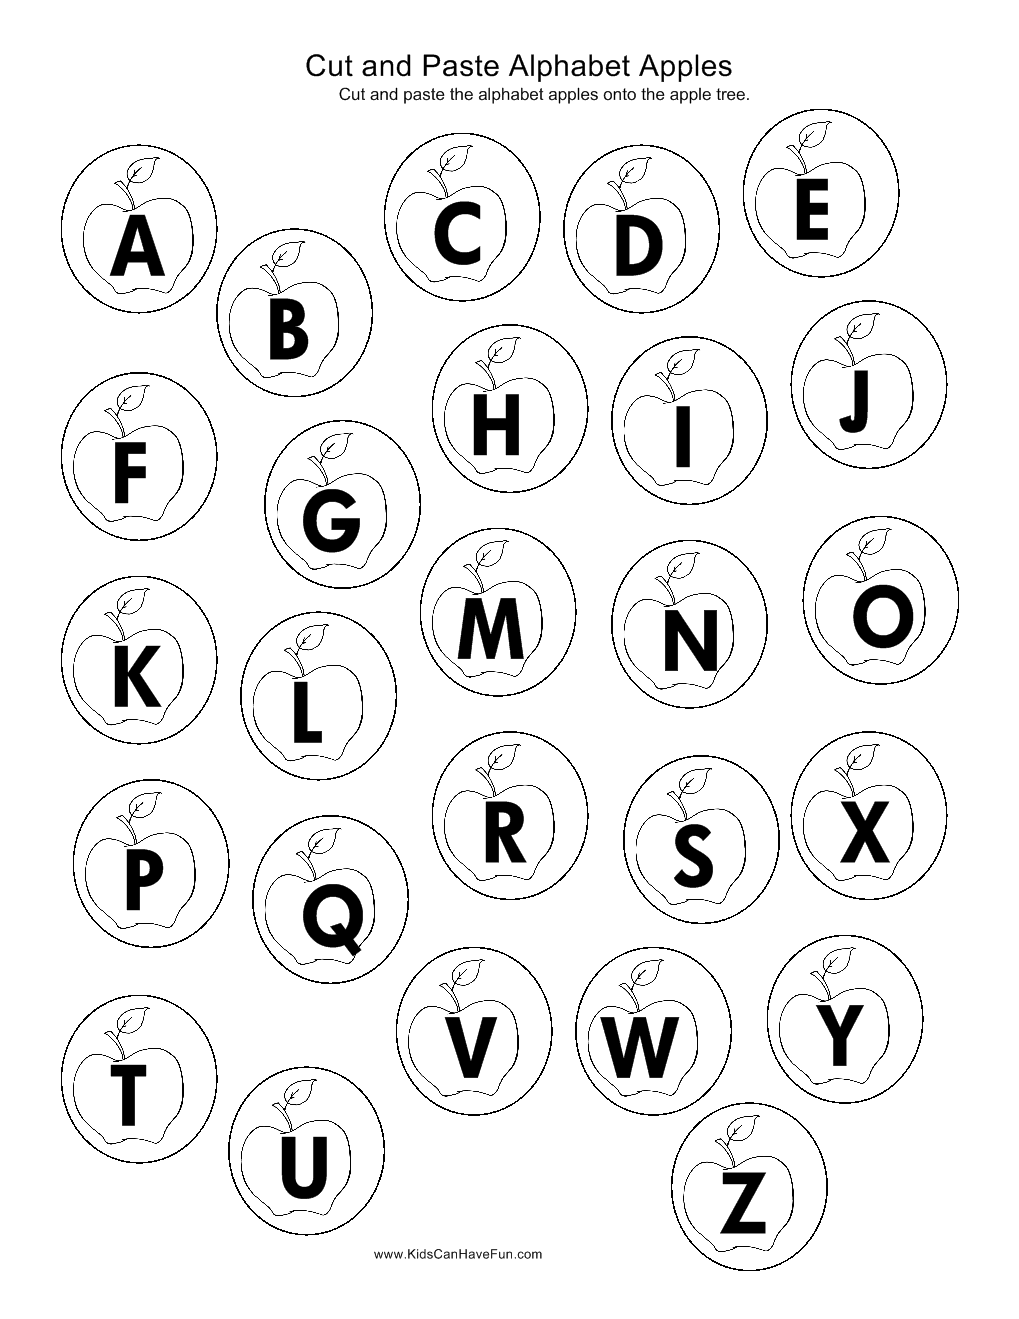 Alphabet Cut and Paste Worksheets